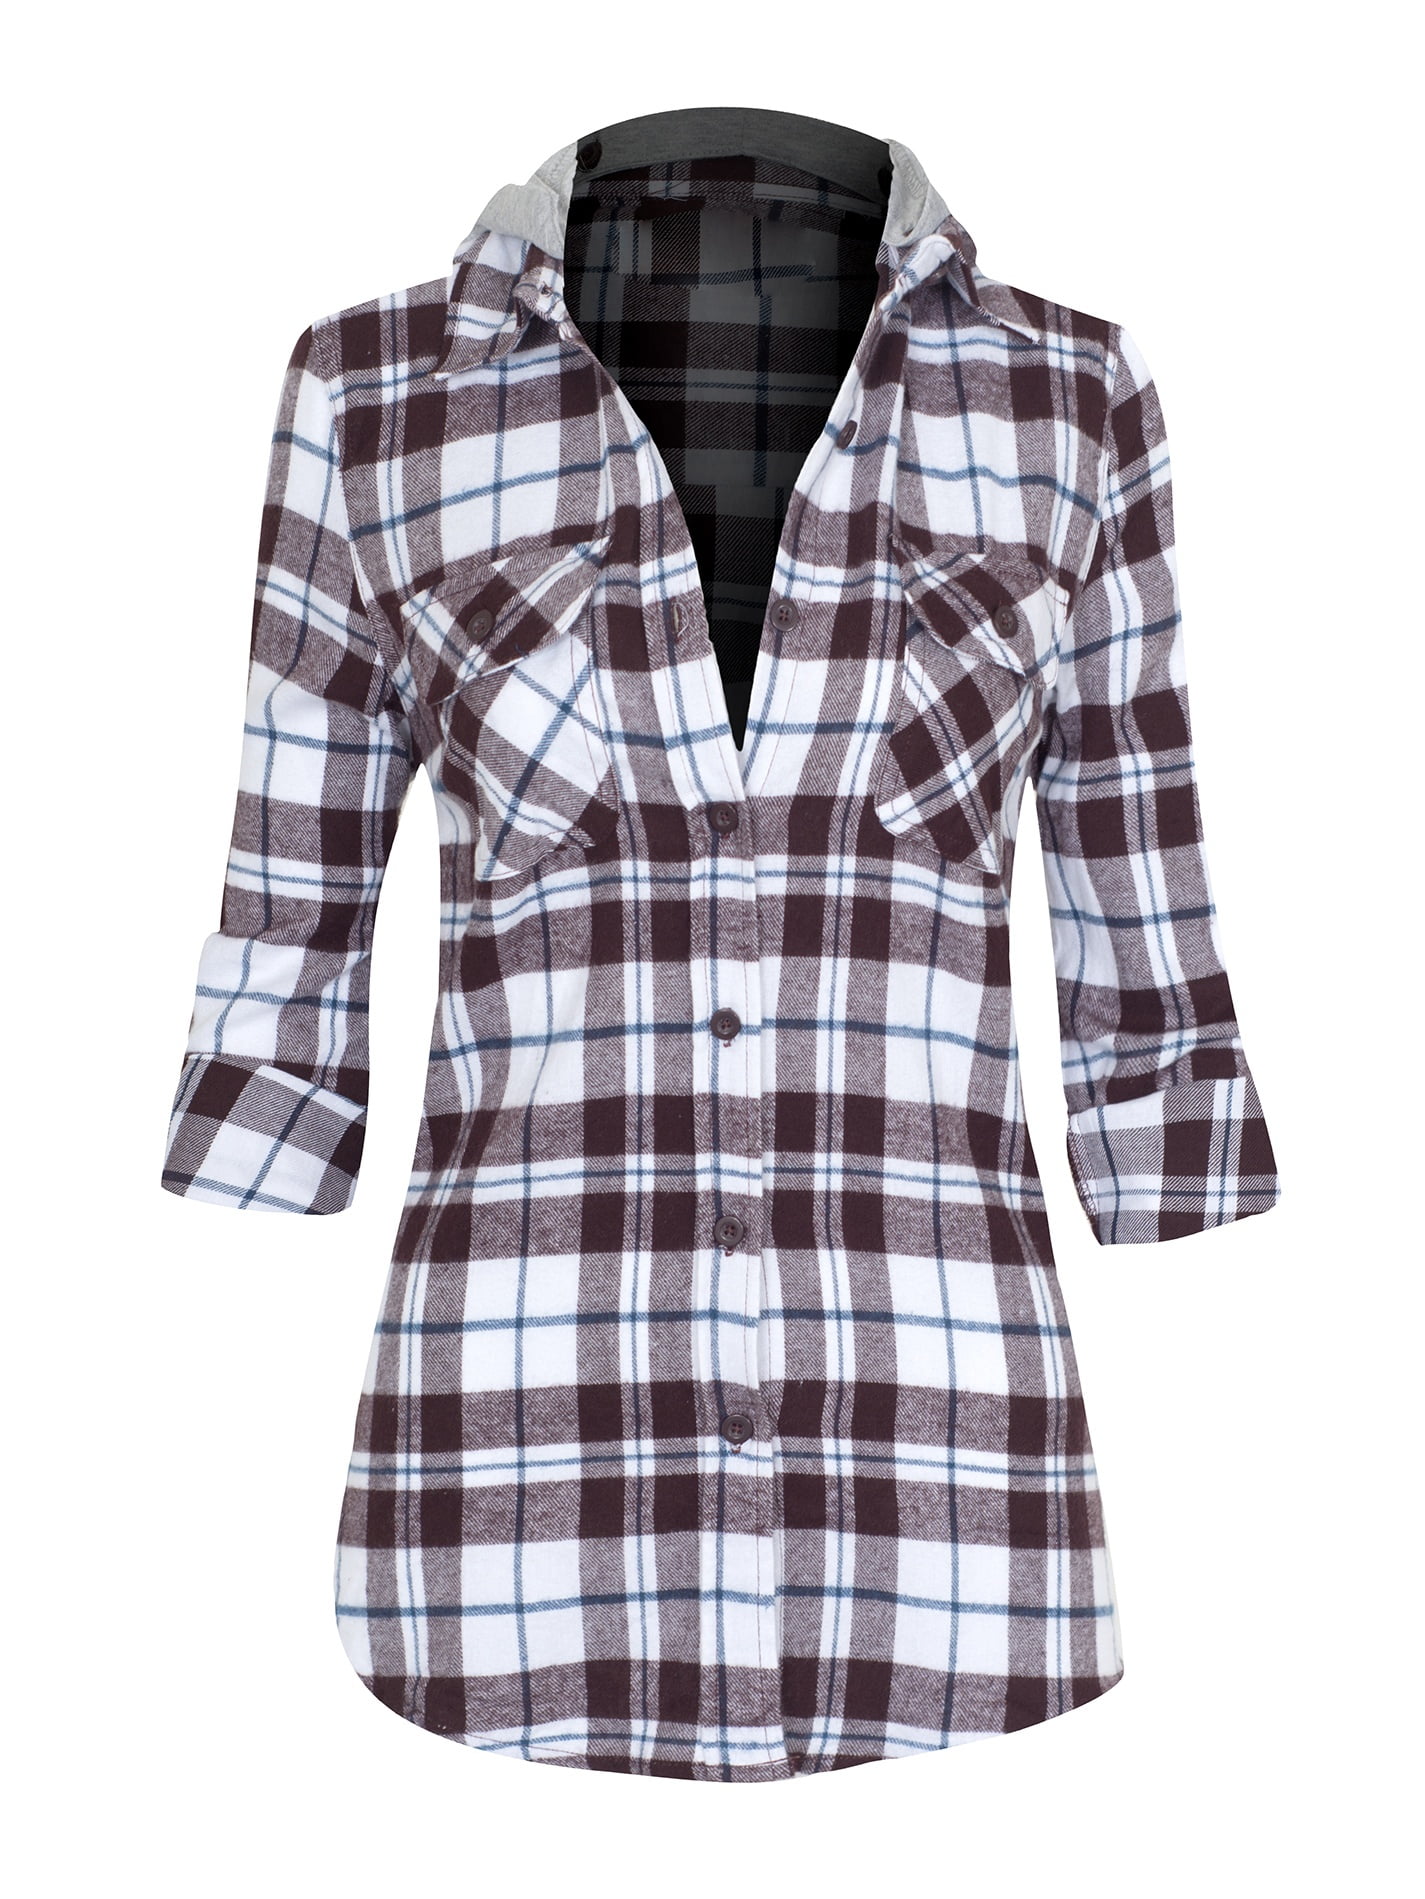 Women's Classic Button Down Long Sleeve Plaid Flannel Shirt with Hood ...